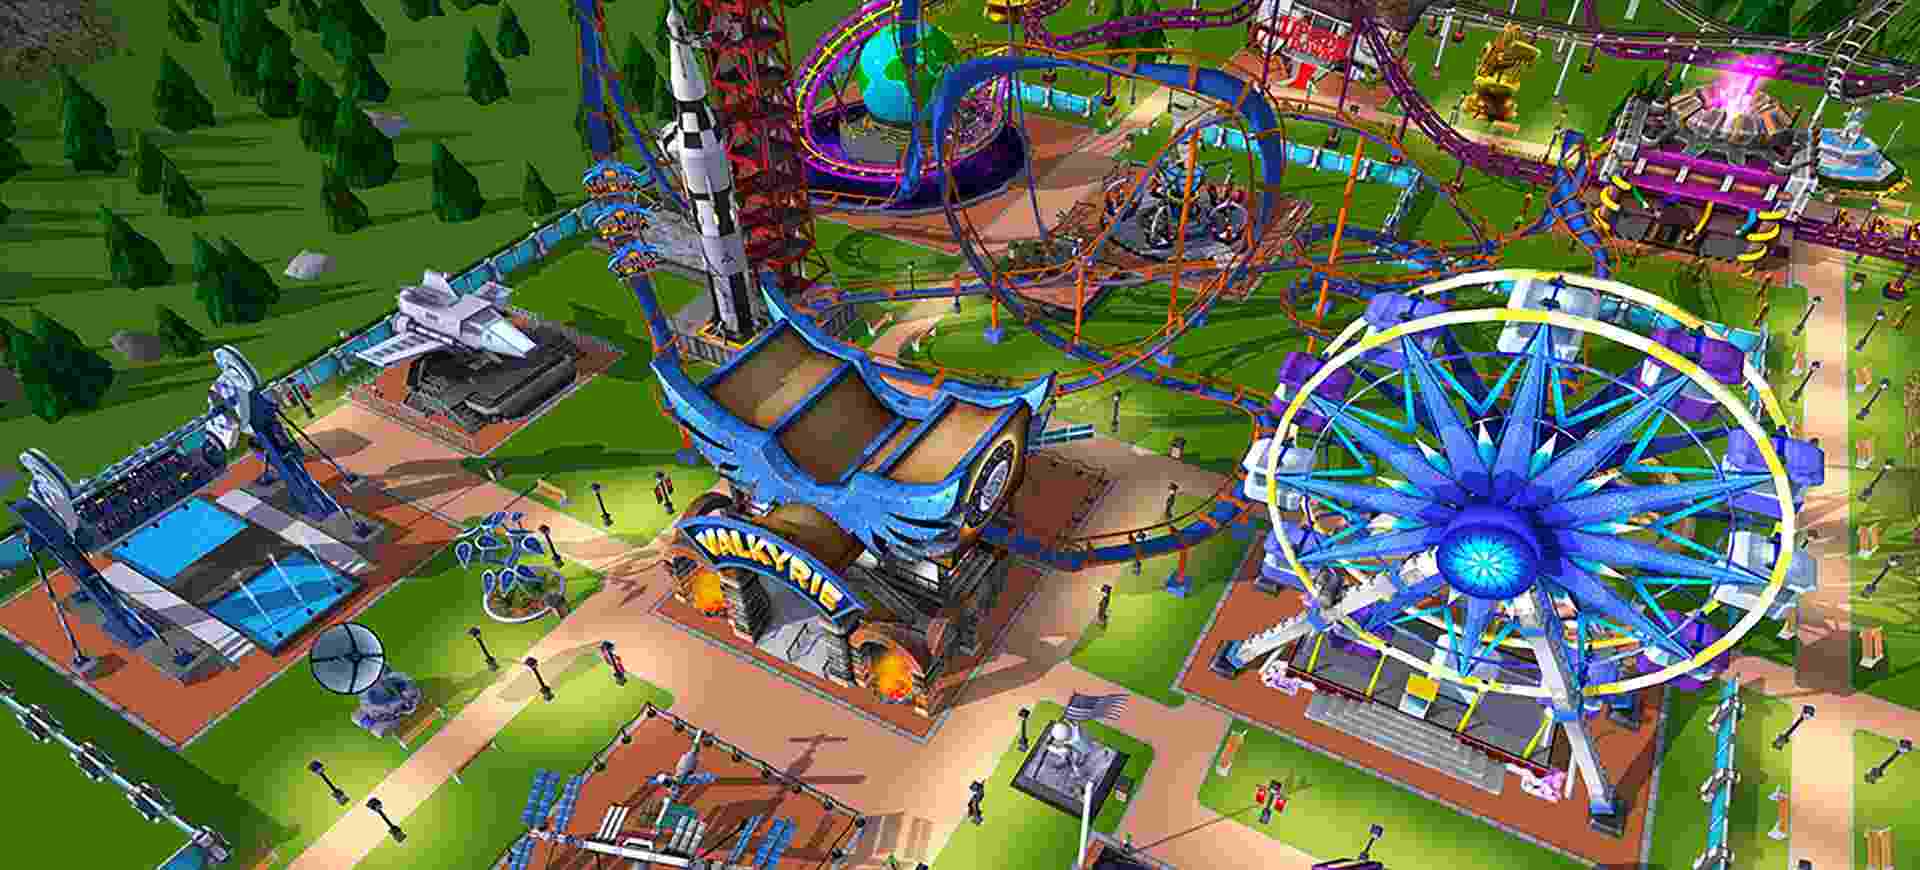 Dowload RollerCoaster Tycoon Touch Mod